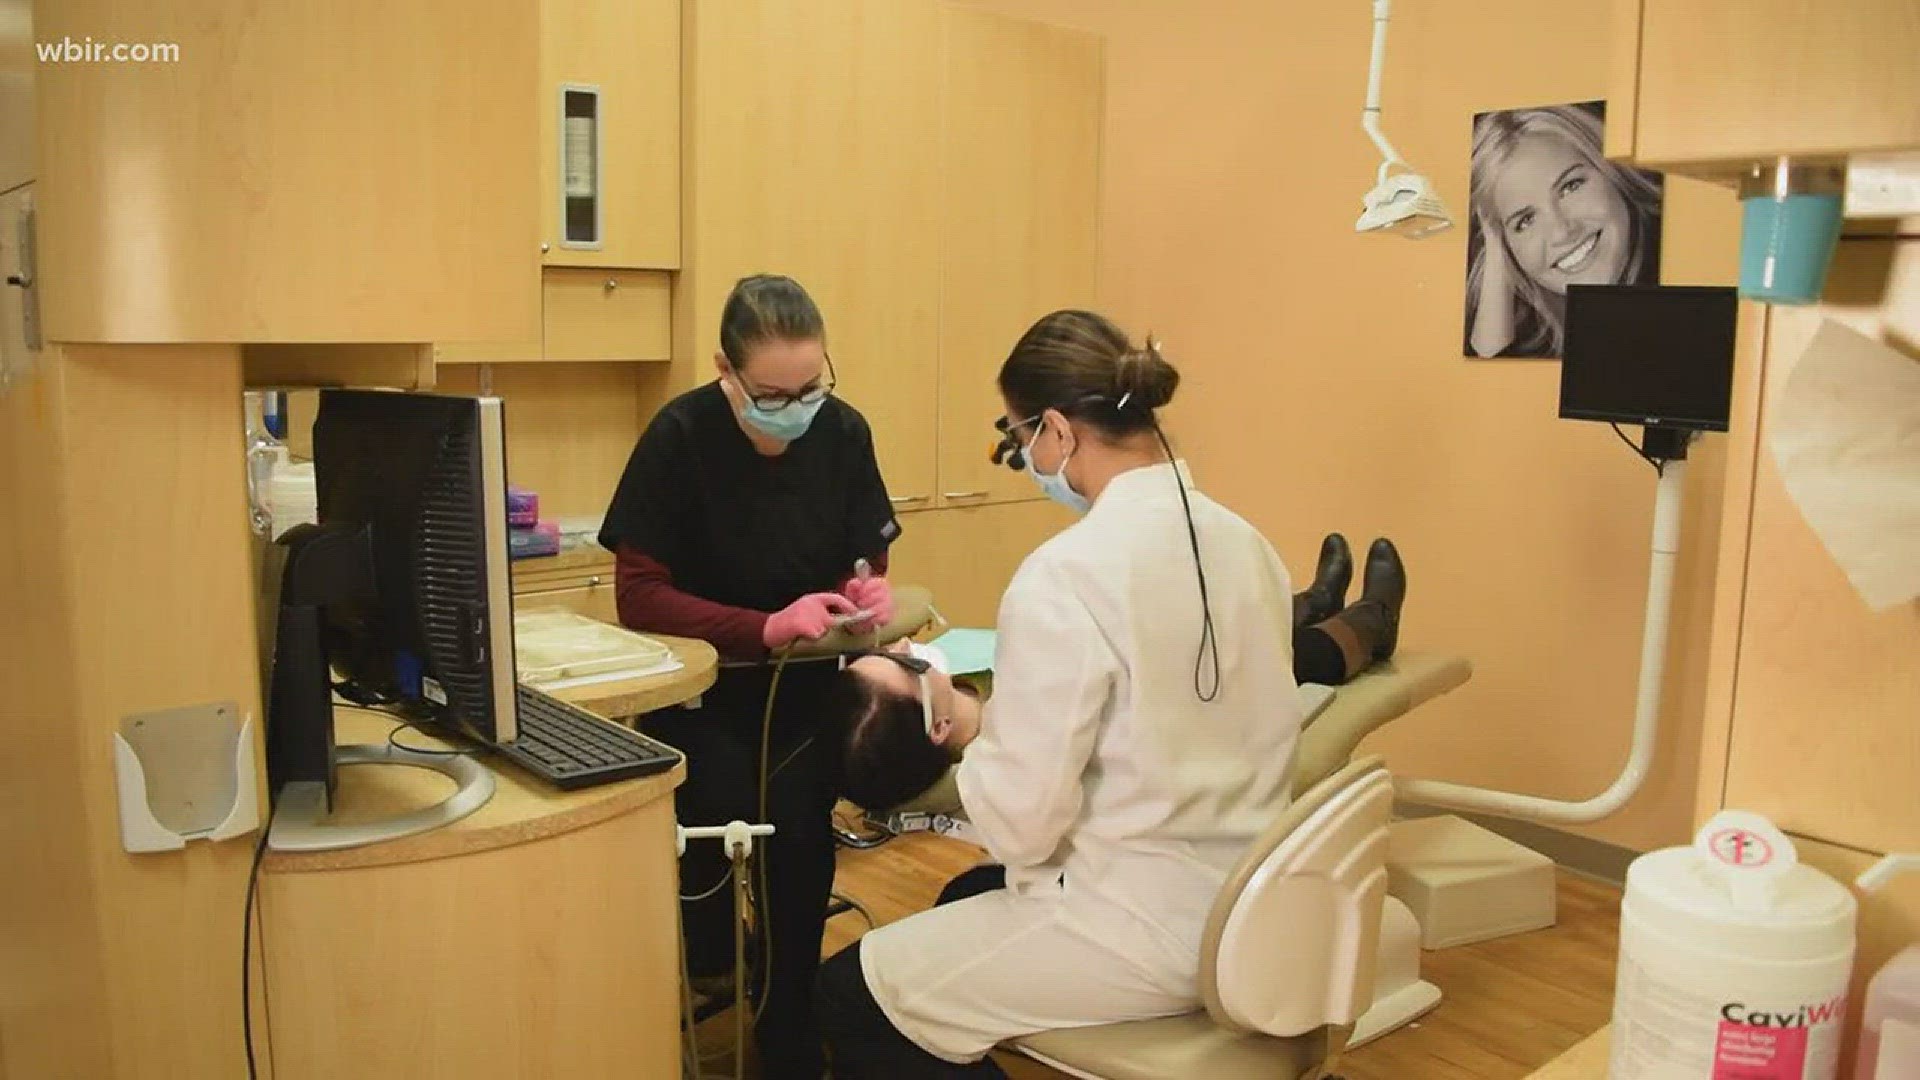 March 8, 2018: An East Tennessee dentist has started a nonprofit to provide free dental care for those who without insurance.